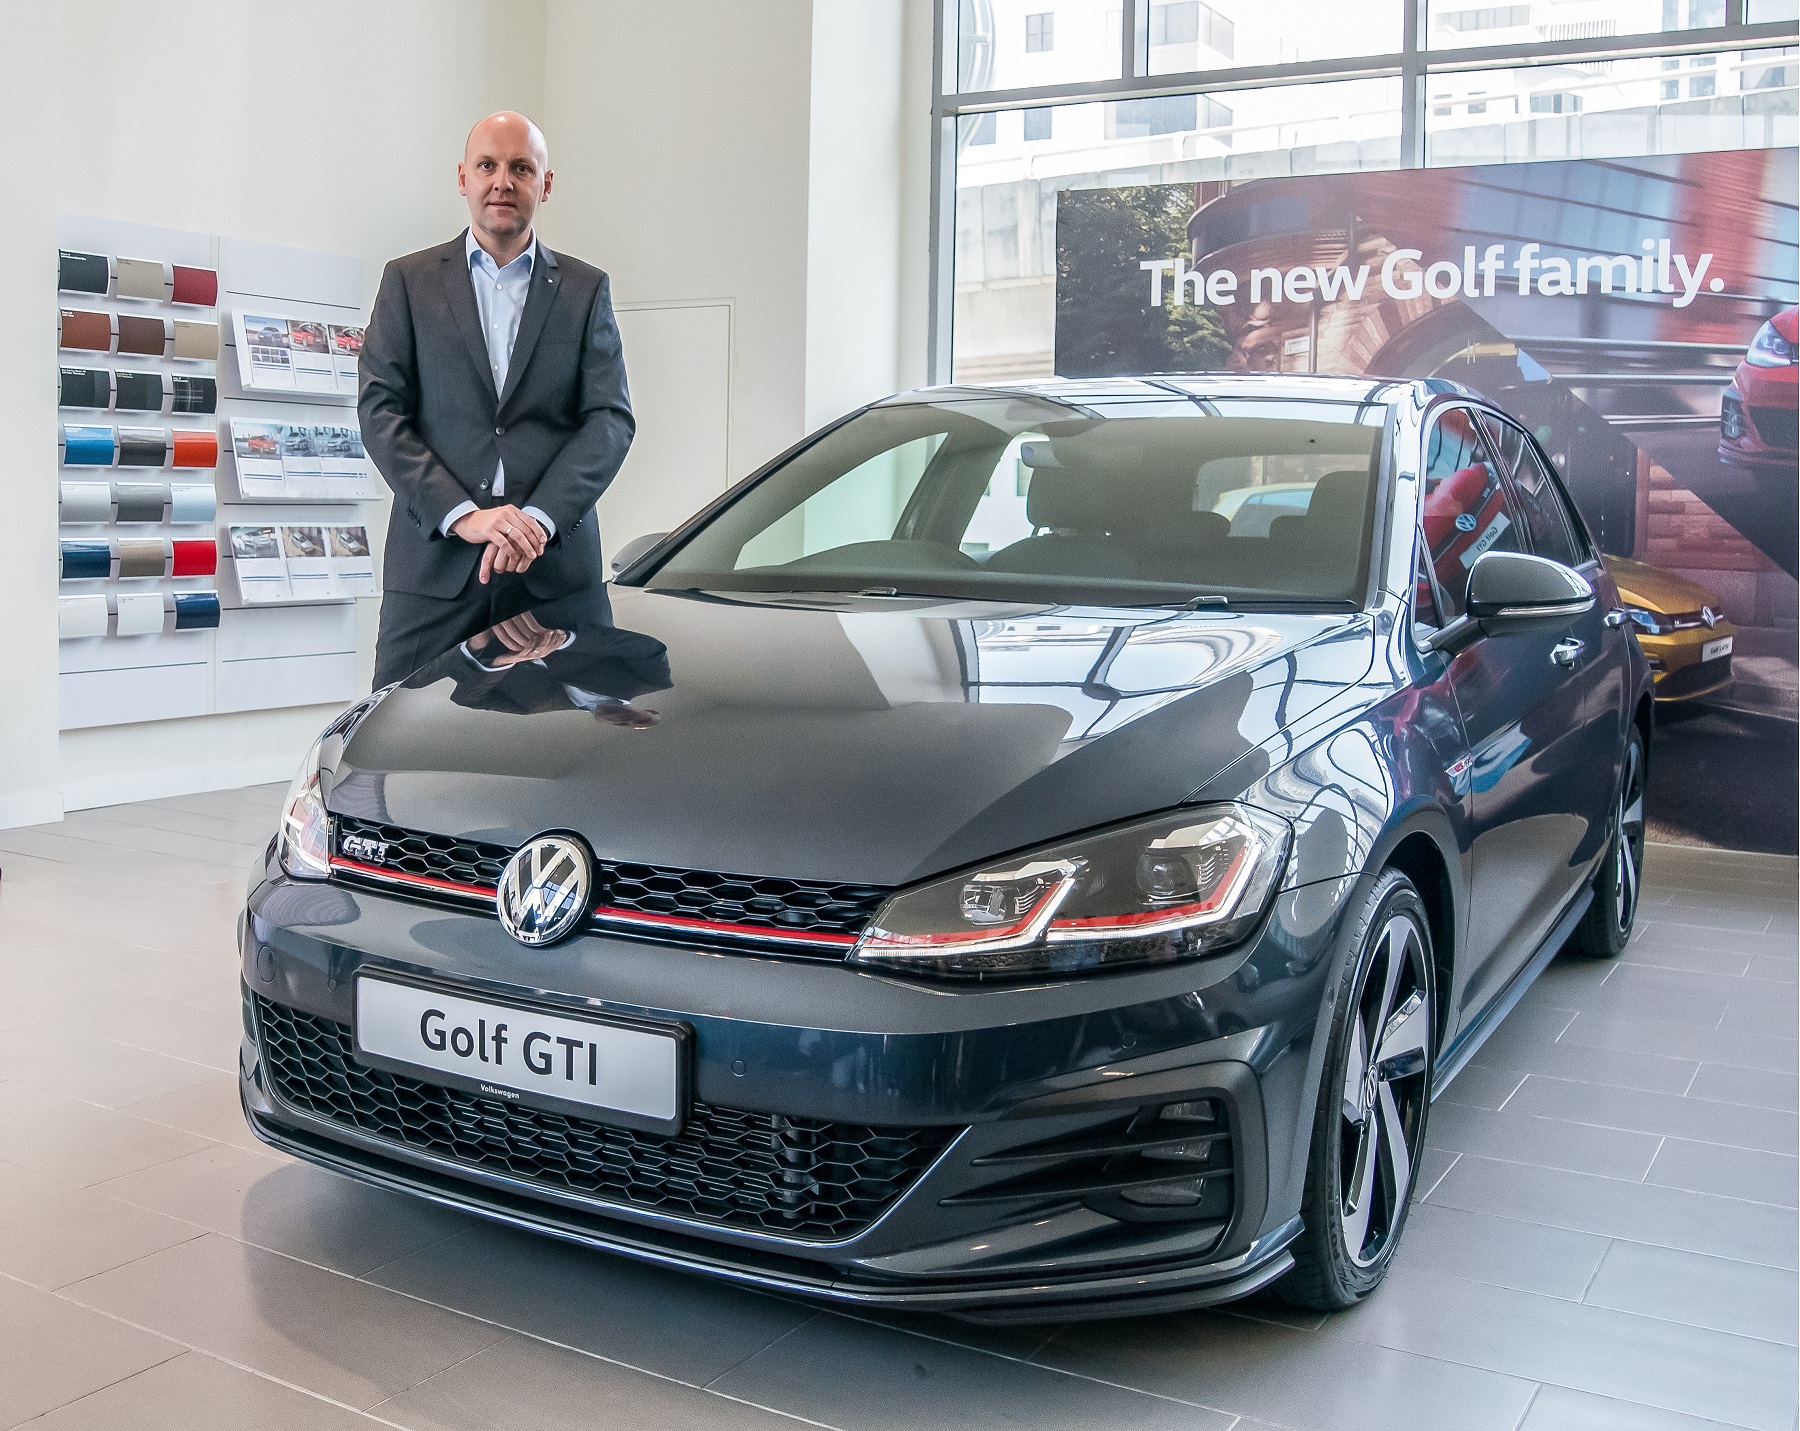 rm2-000-rebates-for-volkswagen-golf-r-gti-news-and-reviews-on